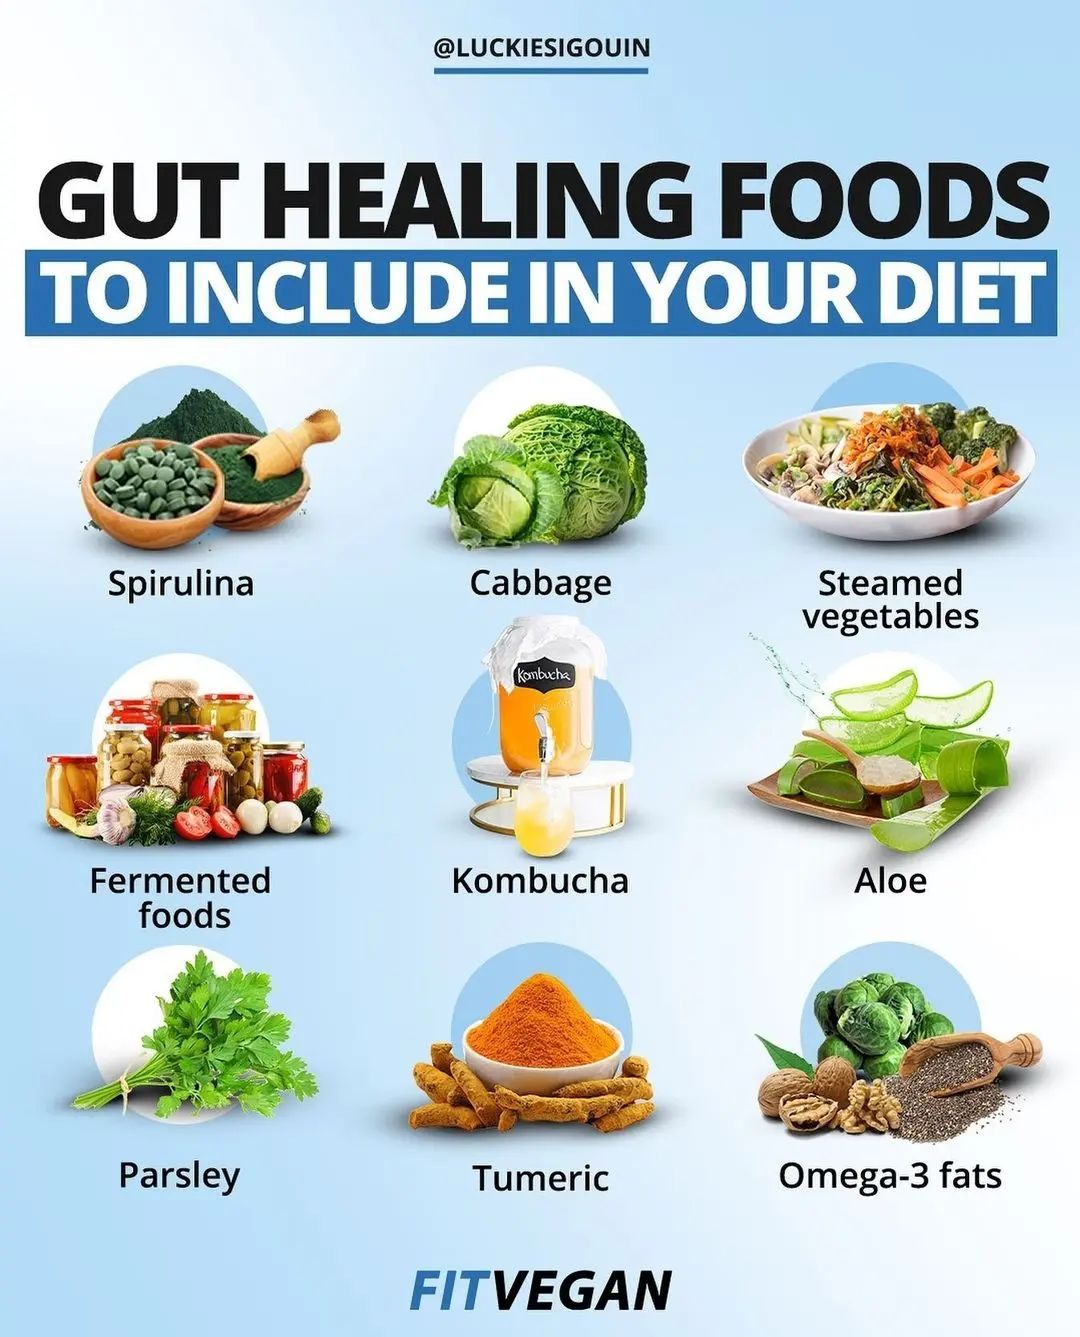 Gut Healing Foods To Include In Your Diet Conveganence 7466